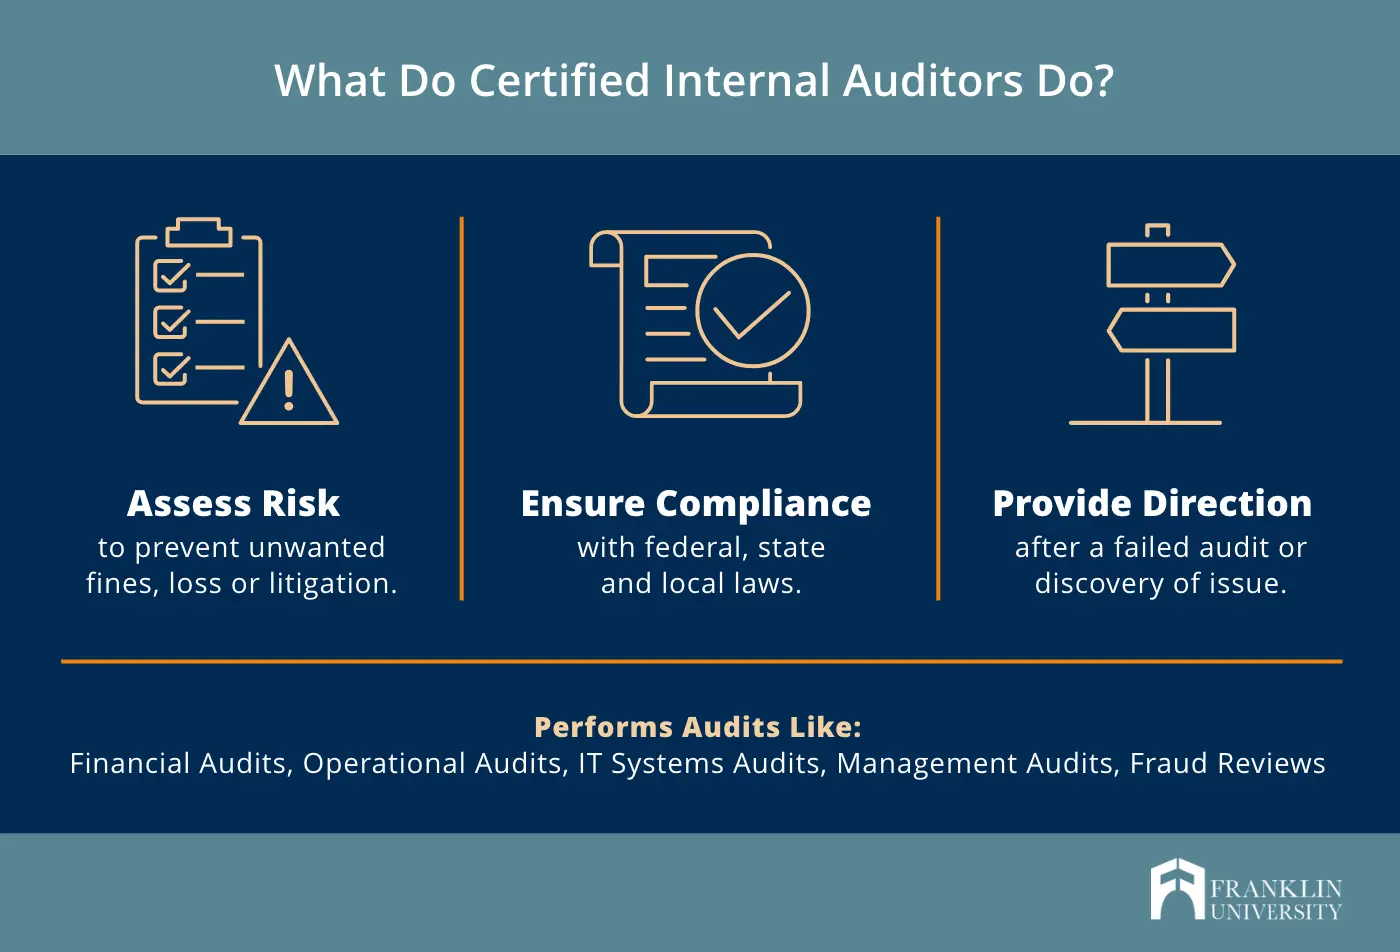 how to verify certified internal auditor - Does certified internal auditor expire